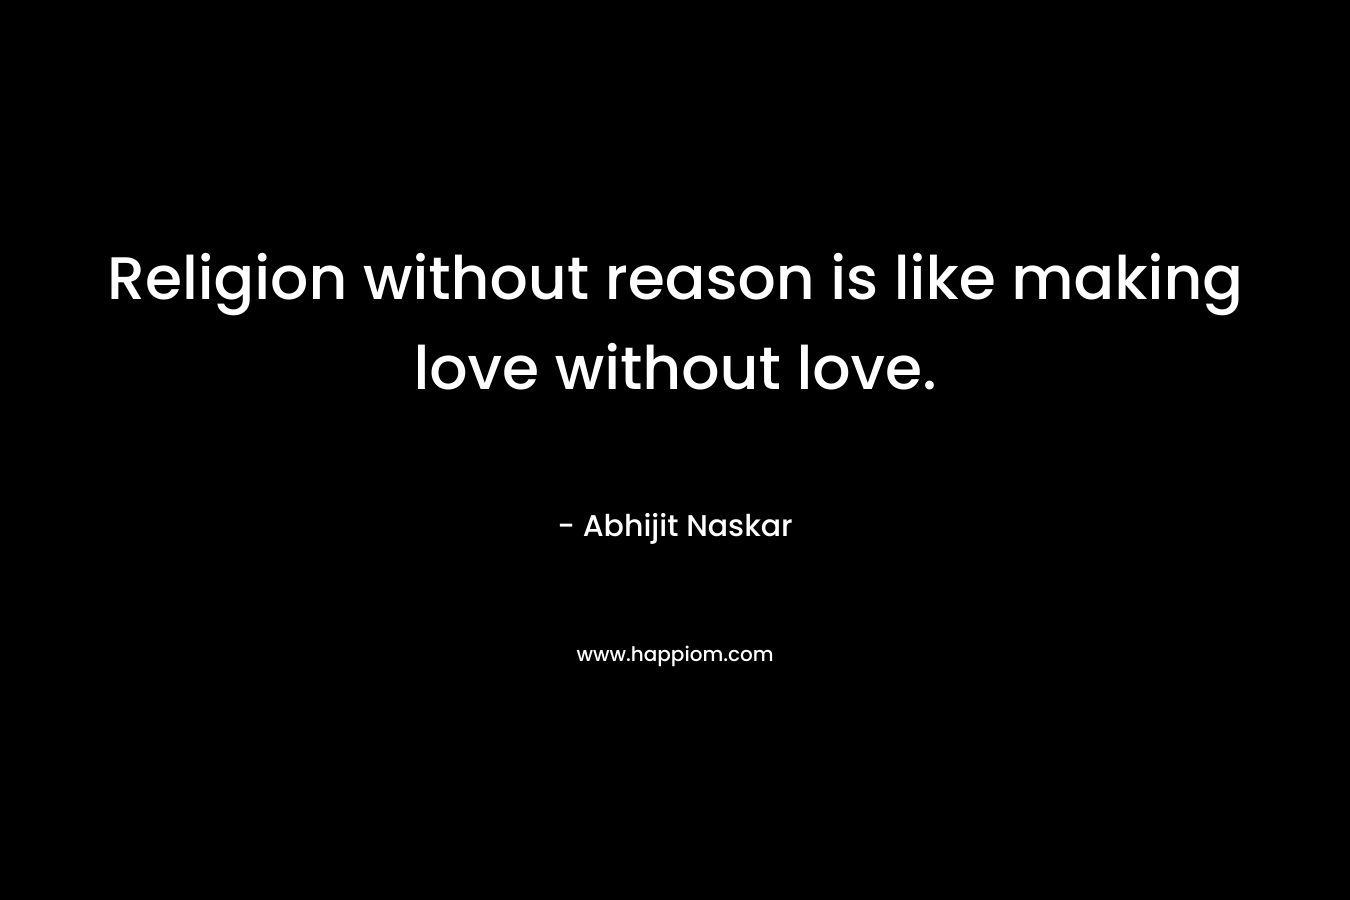 Religion without reason is like making love without love.